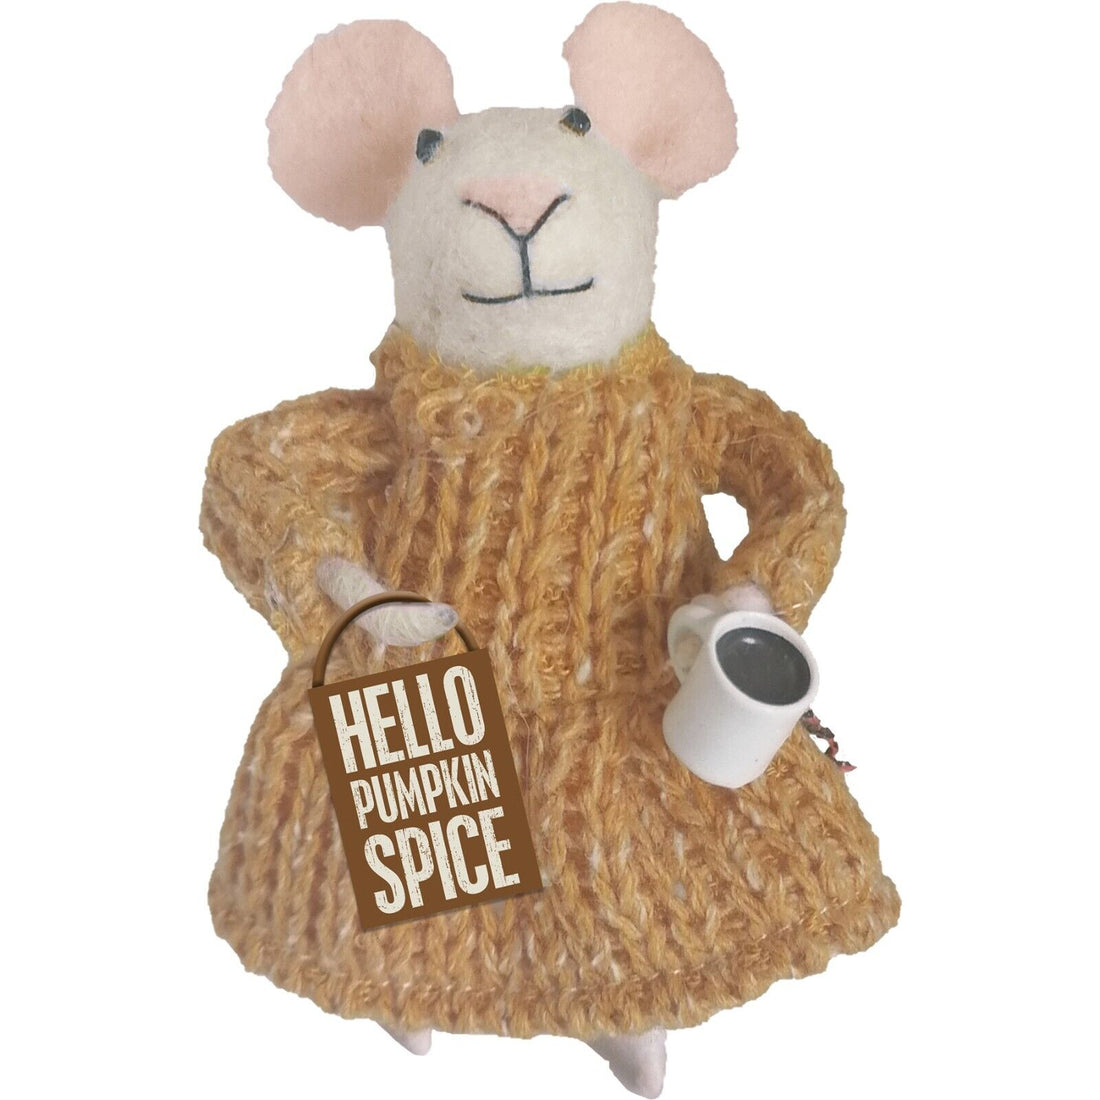 Primitive/Country Halloween Felt Hello Fall Pumpkin Spice Mouse ornament - The Primitive Pineapple Collection